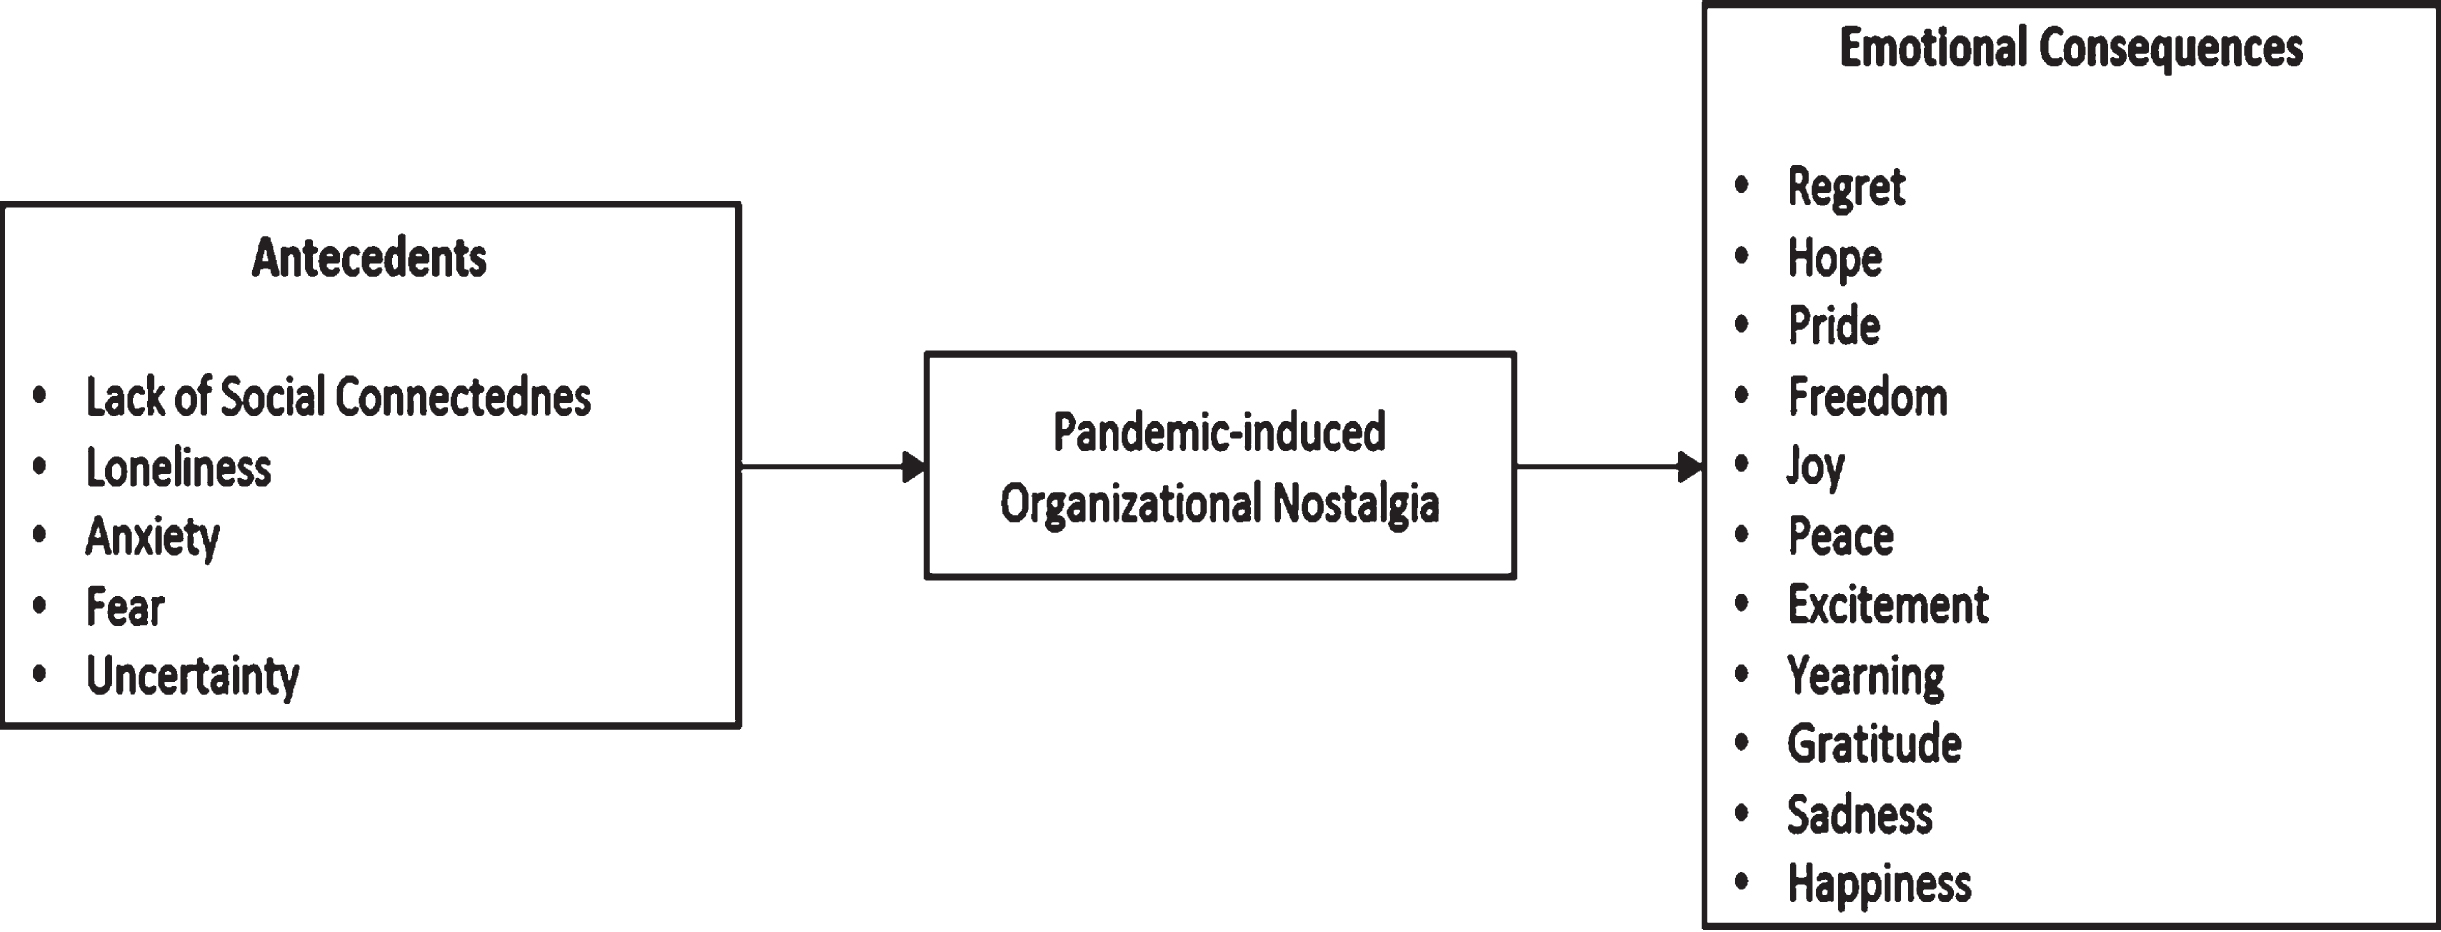 Antecedents and emotional consequences of pandemic-induced organizational nostalgia.